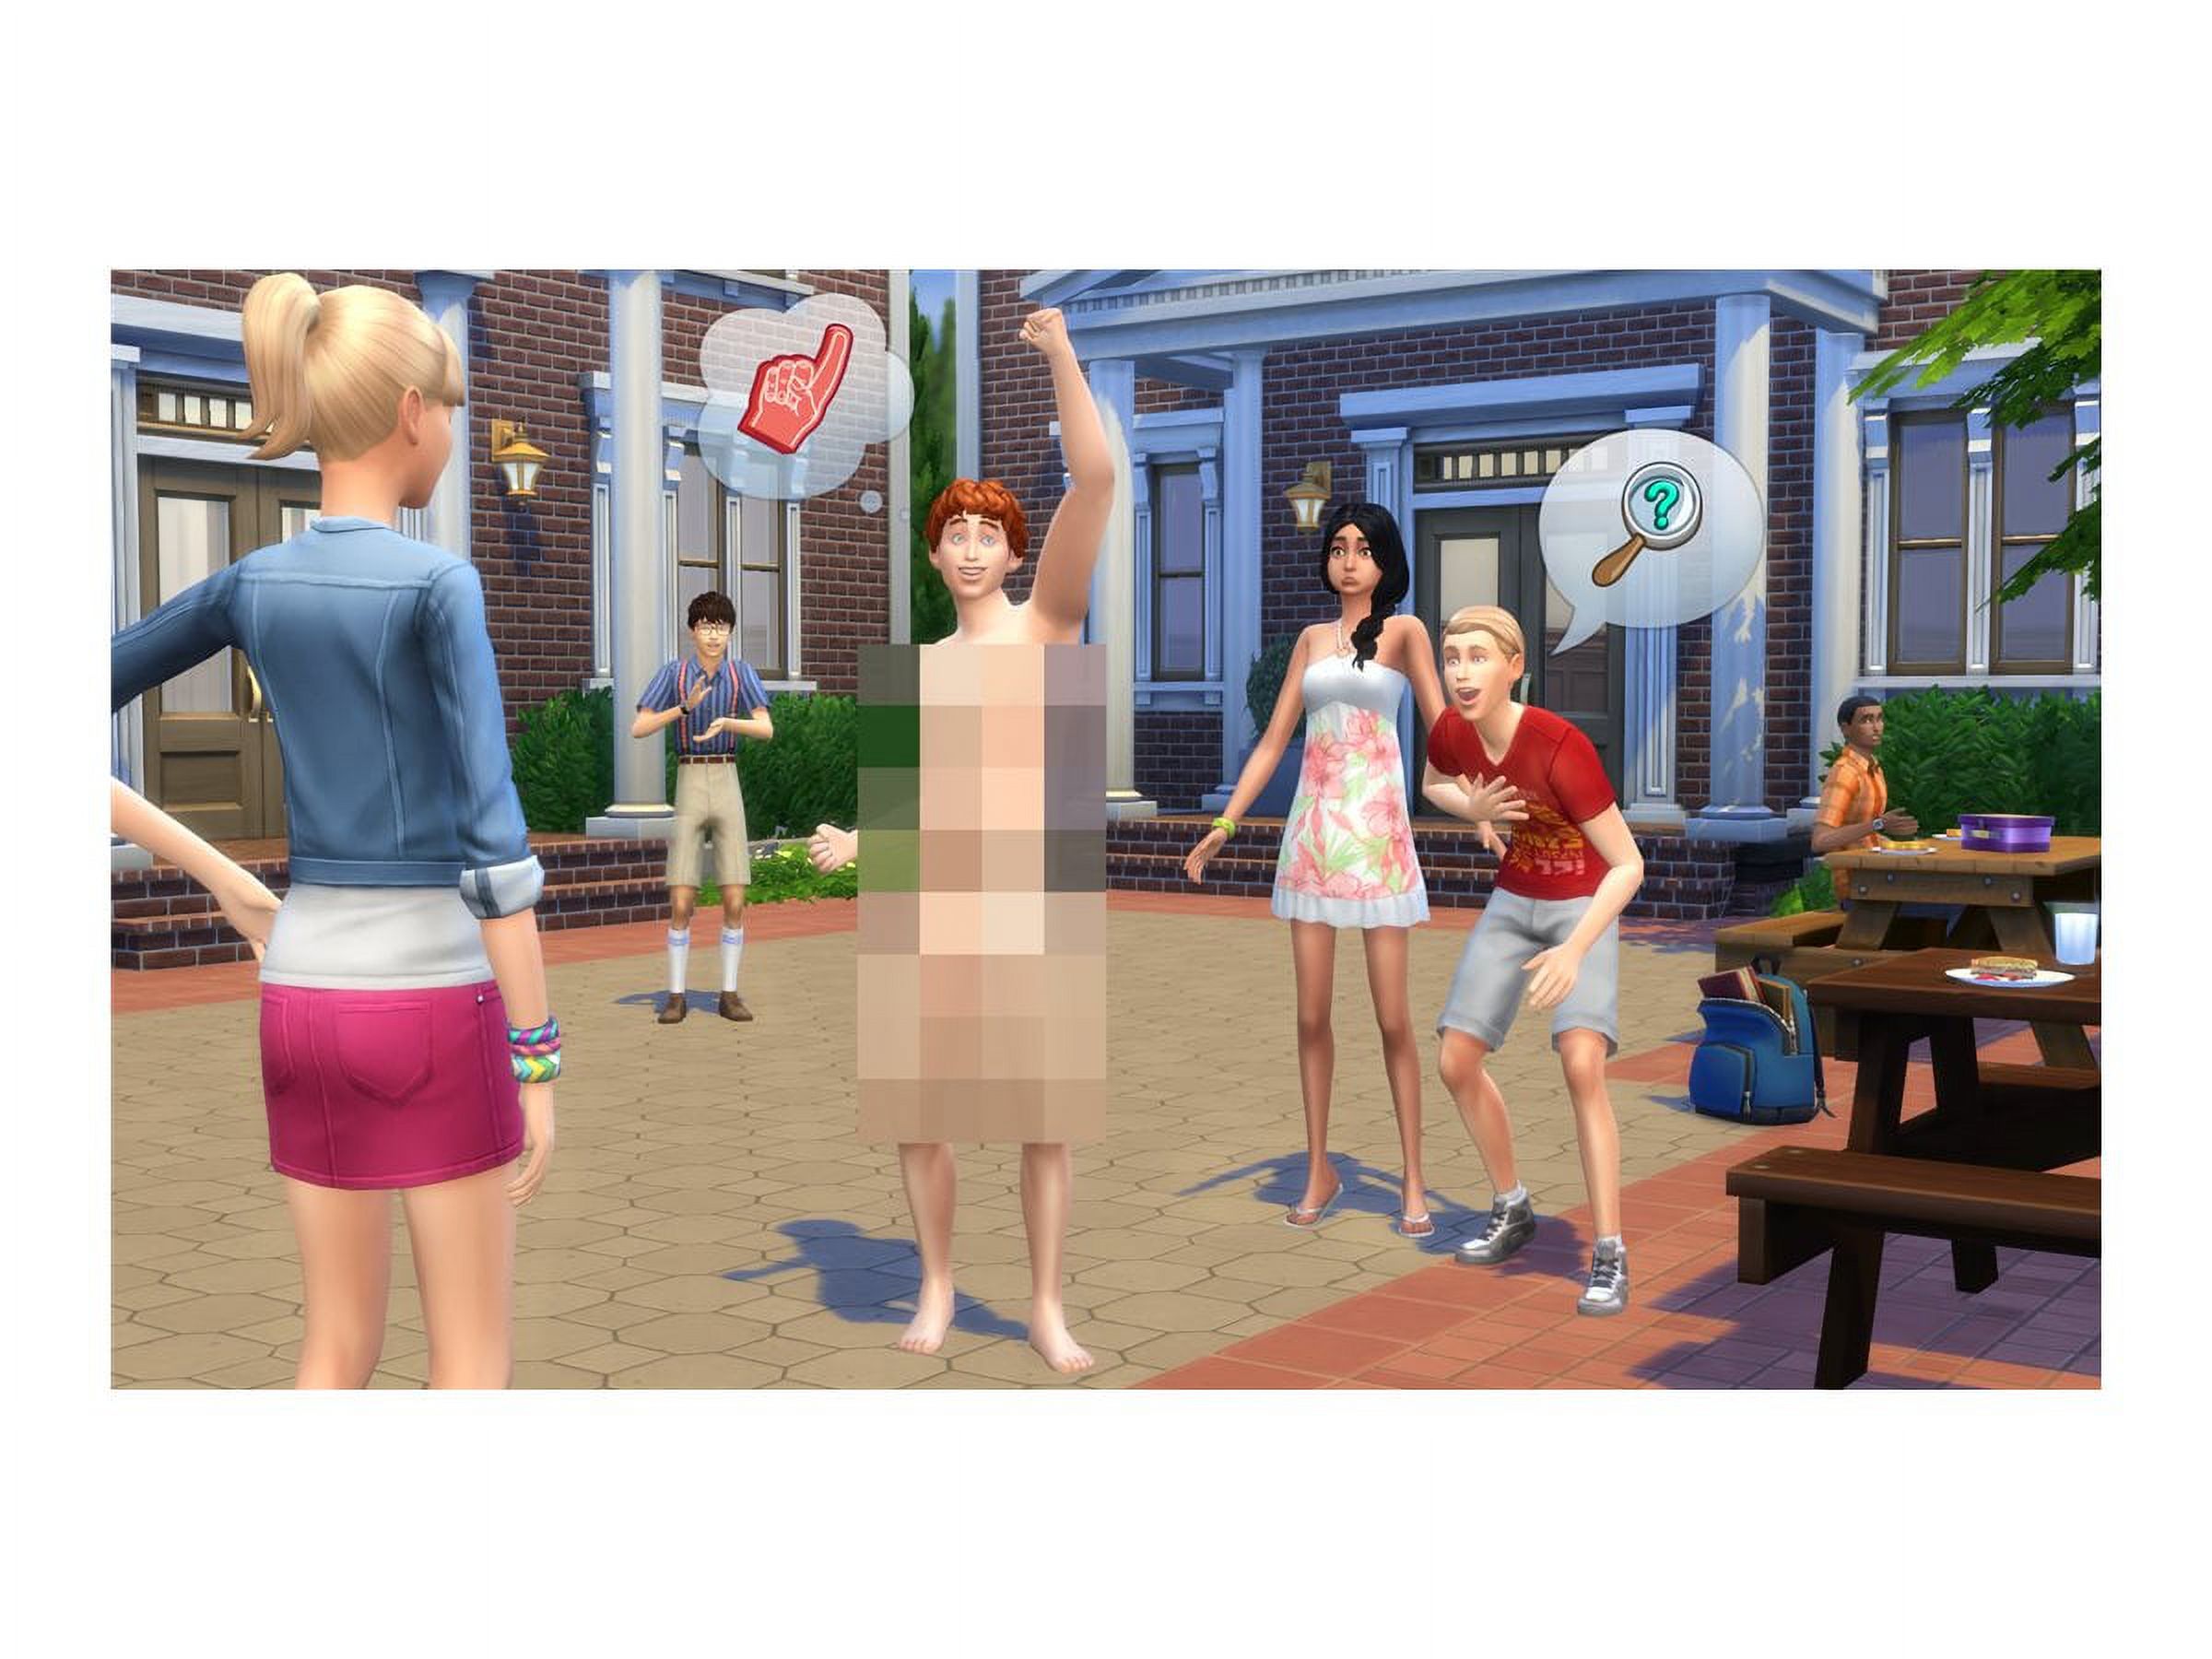 The Sims 3 - Nintendo 3DS - image 1 of 7